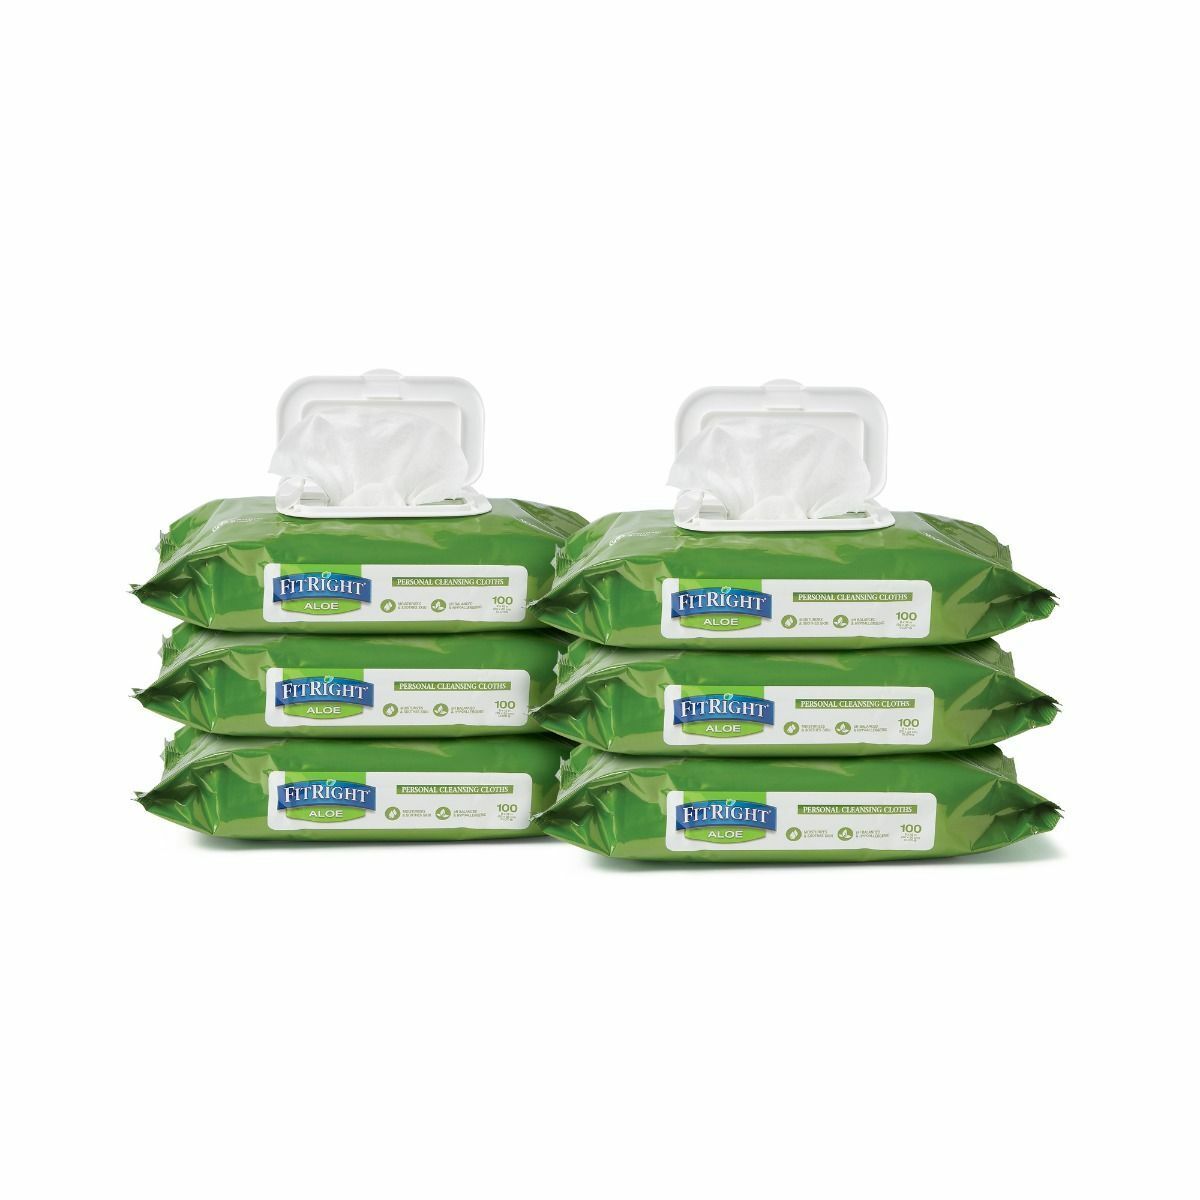 Medline FitRight Aloe Personal Cleansing Incontinence Wipes 8 x 12 inch, White, PICK!